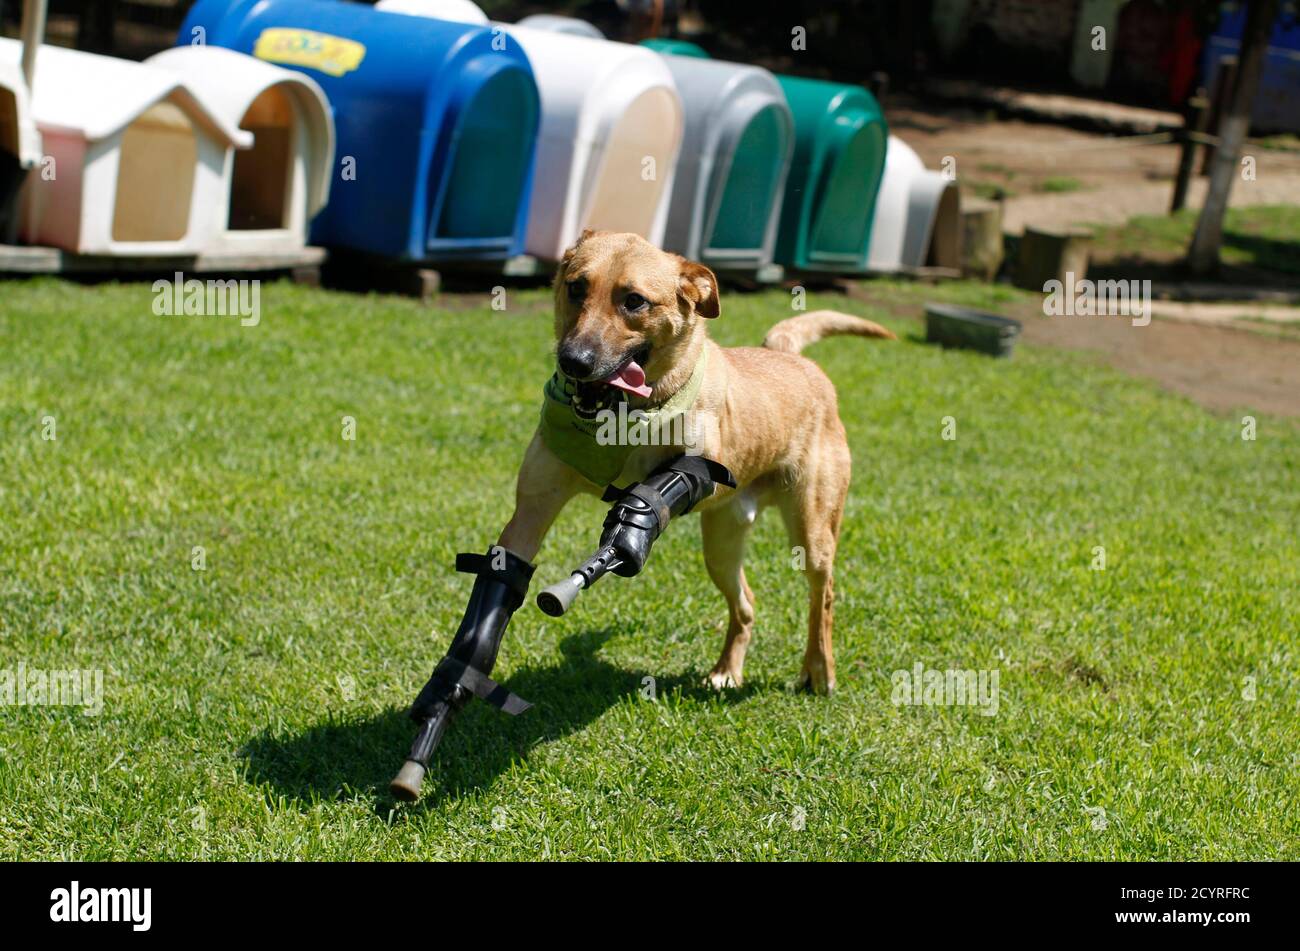 A dog named Pay de Limon (Lemon Pay) runs fitted with two front prosthetic  legs at Milagros Caninos rescue shelter in Mexico City August 29, 2012.  Members of a drug gang in